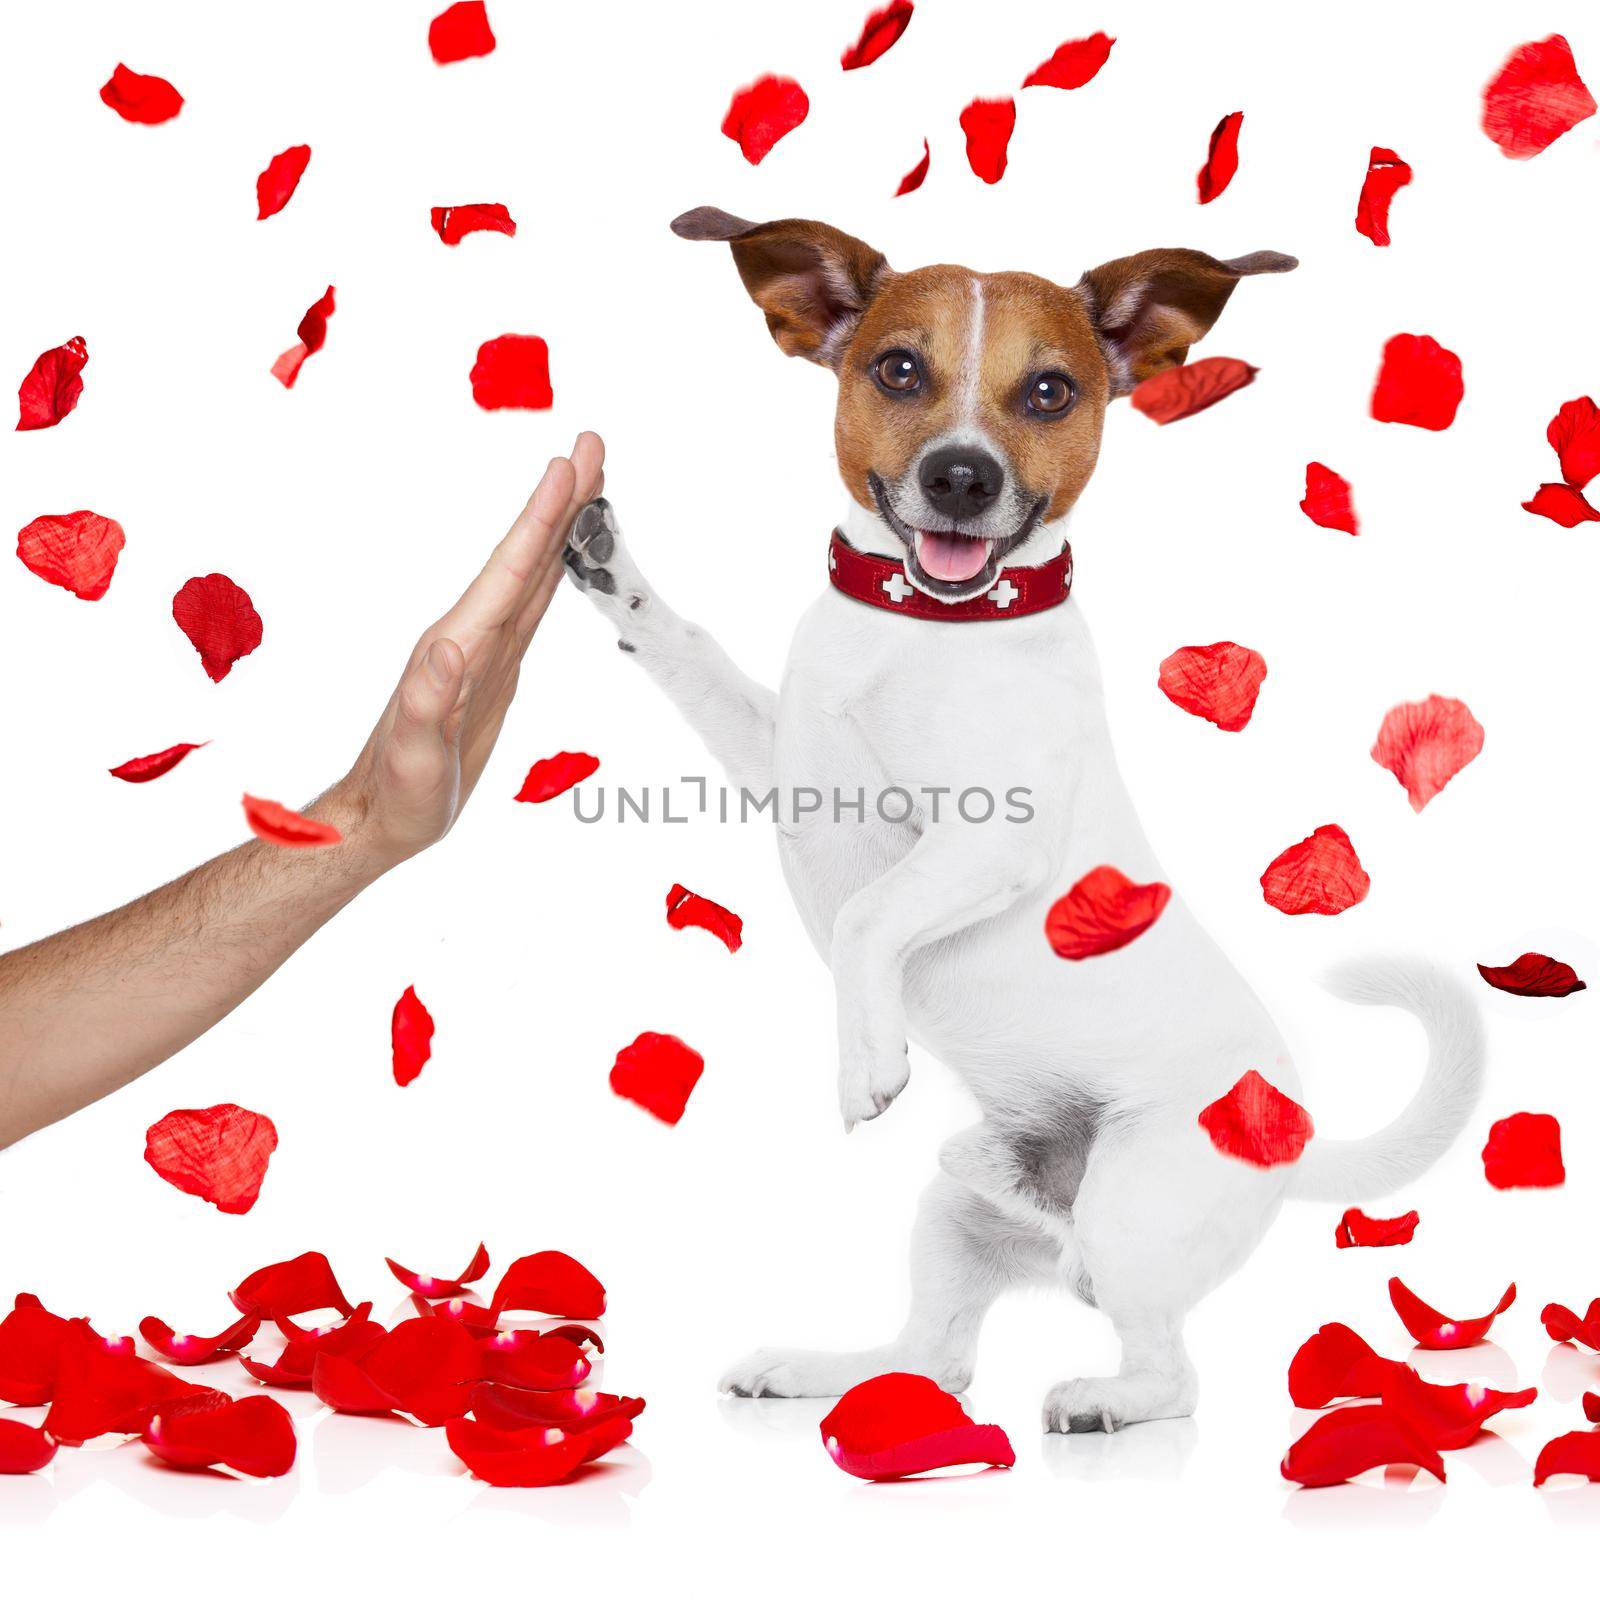 jack russell dog crazy and silly in love   on valentines day , isolated on white background , high five paw with owner hand